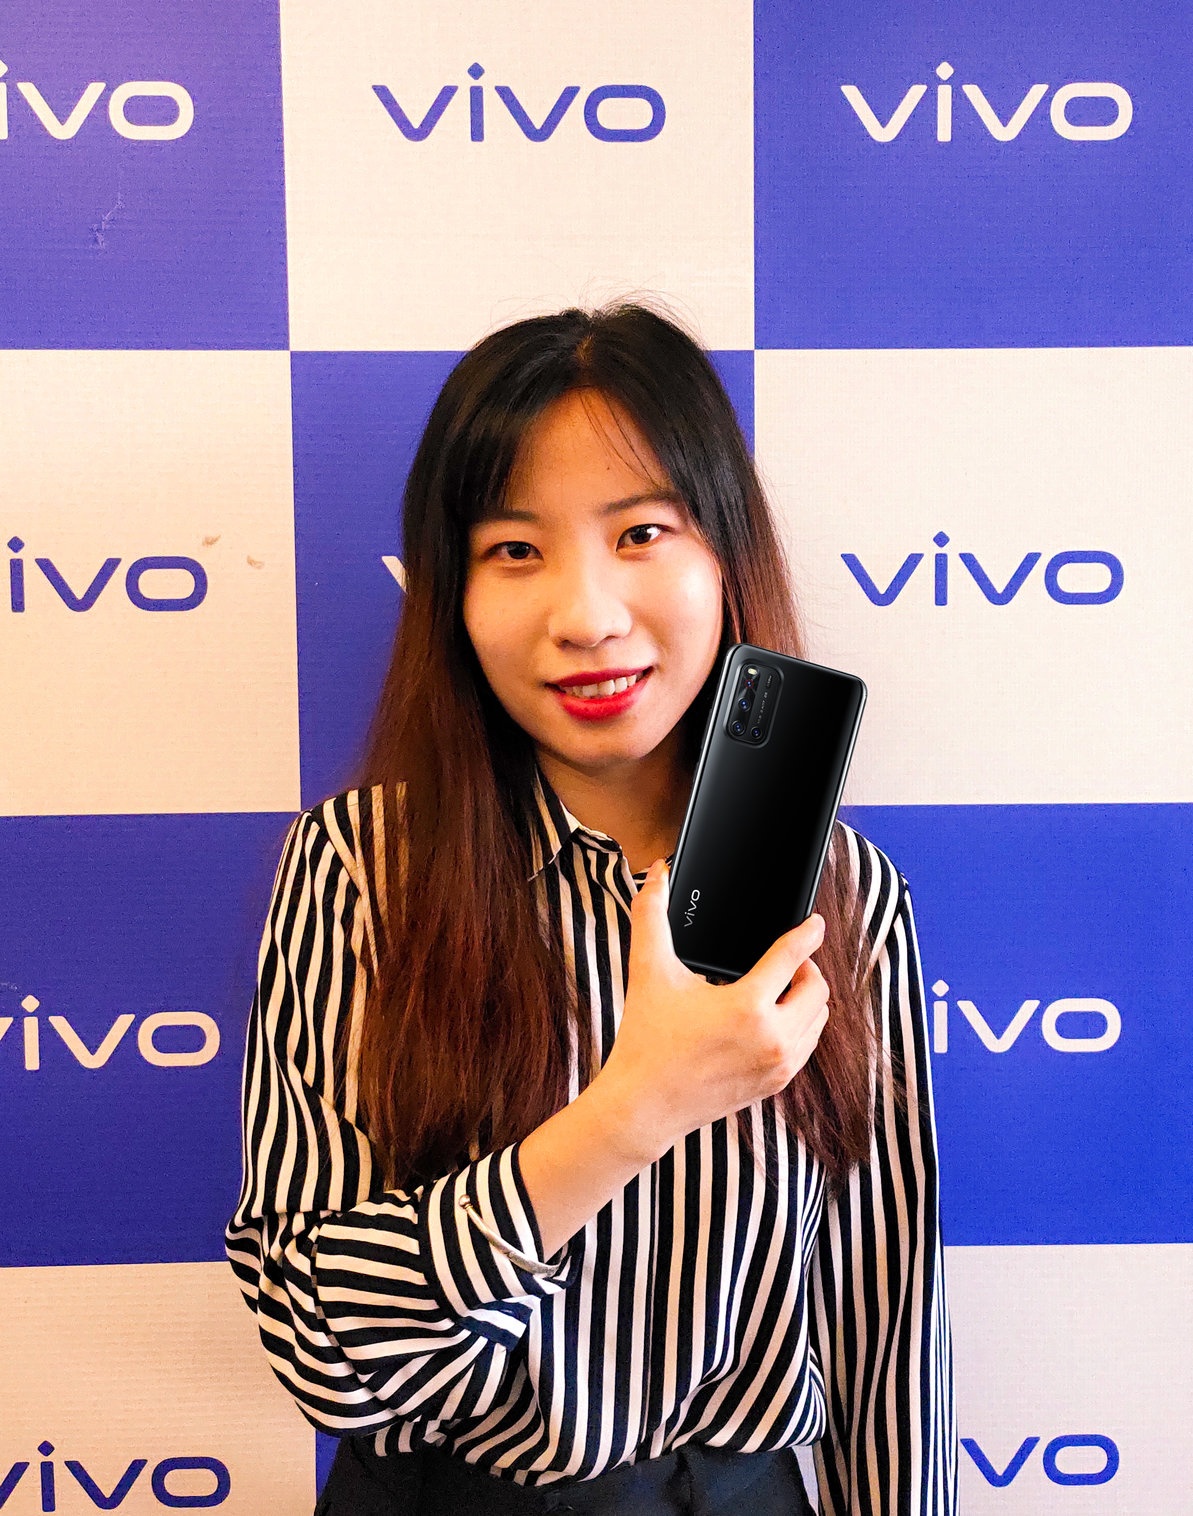 Combining Technology and Fashion, vivo V19 Offers Indus-try-Leading Selfie Capabilities and Stunning Design